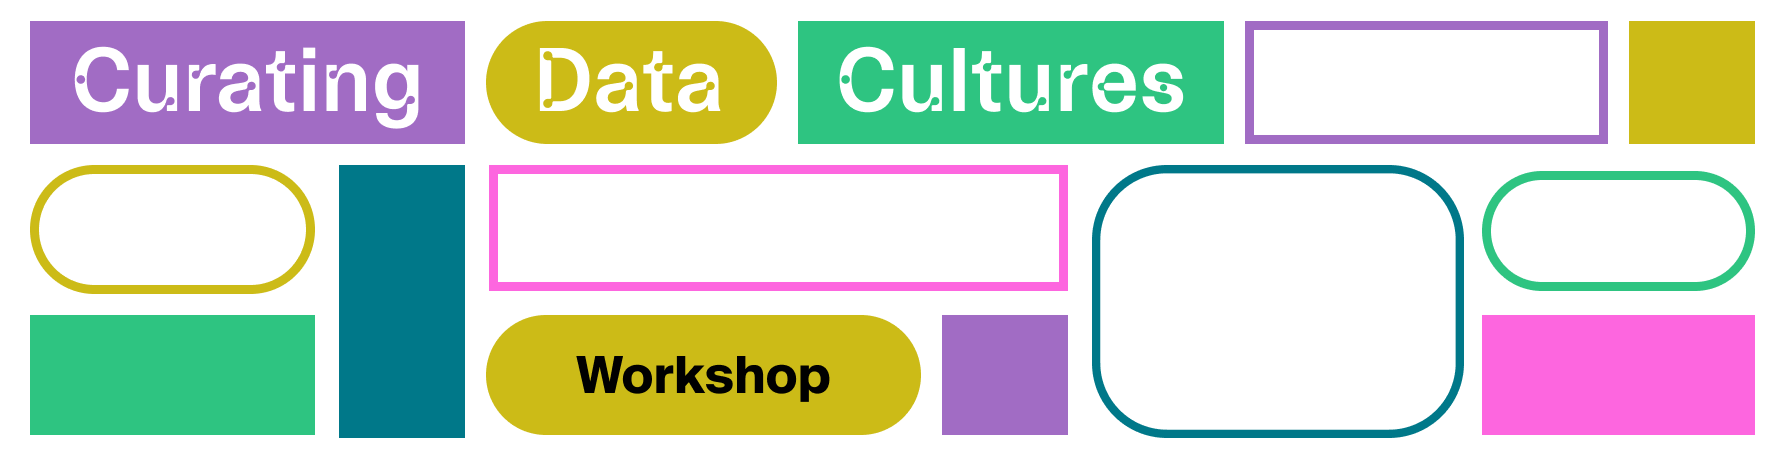 curating open data workshop